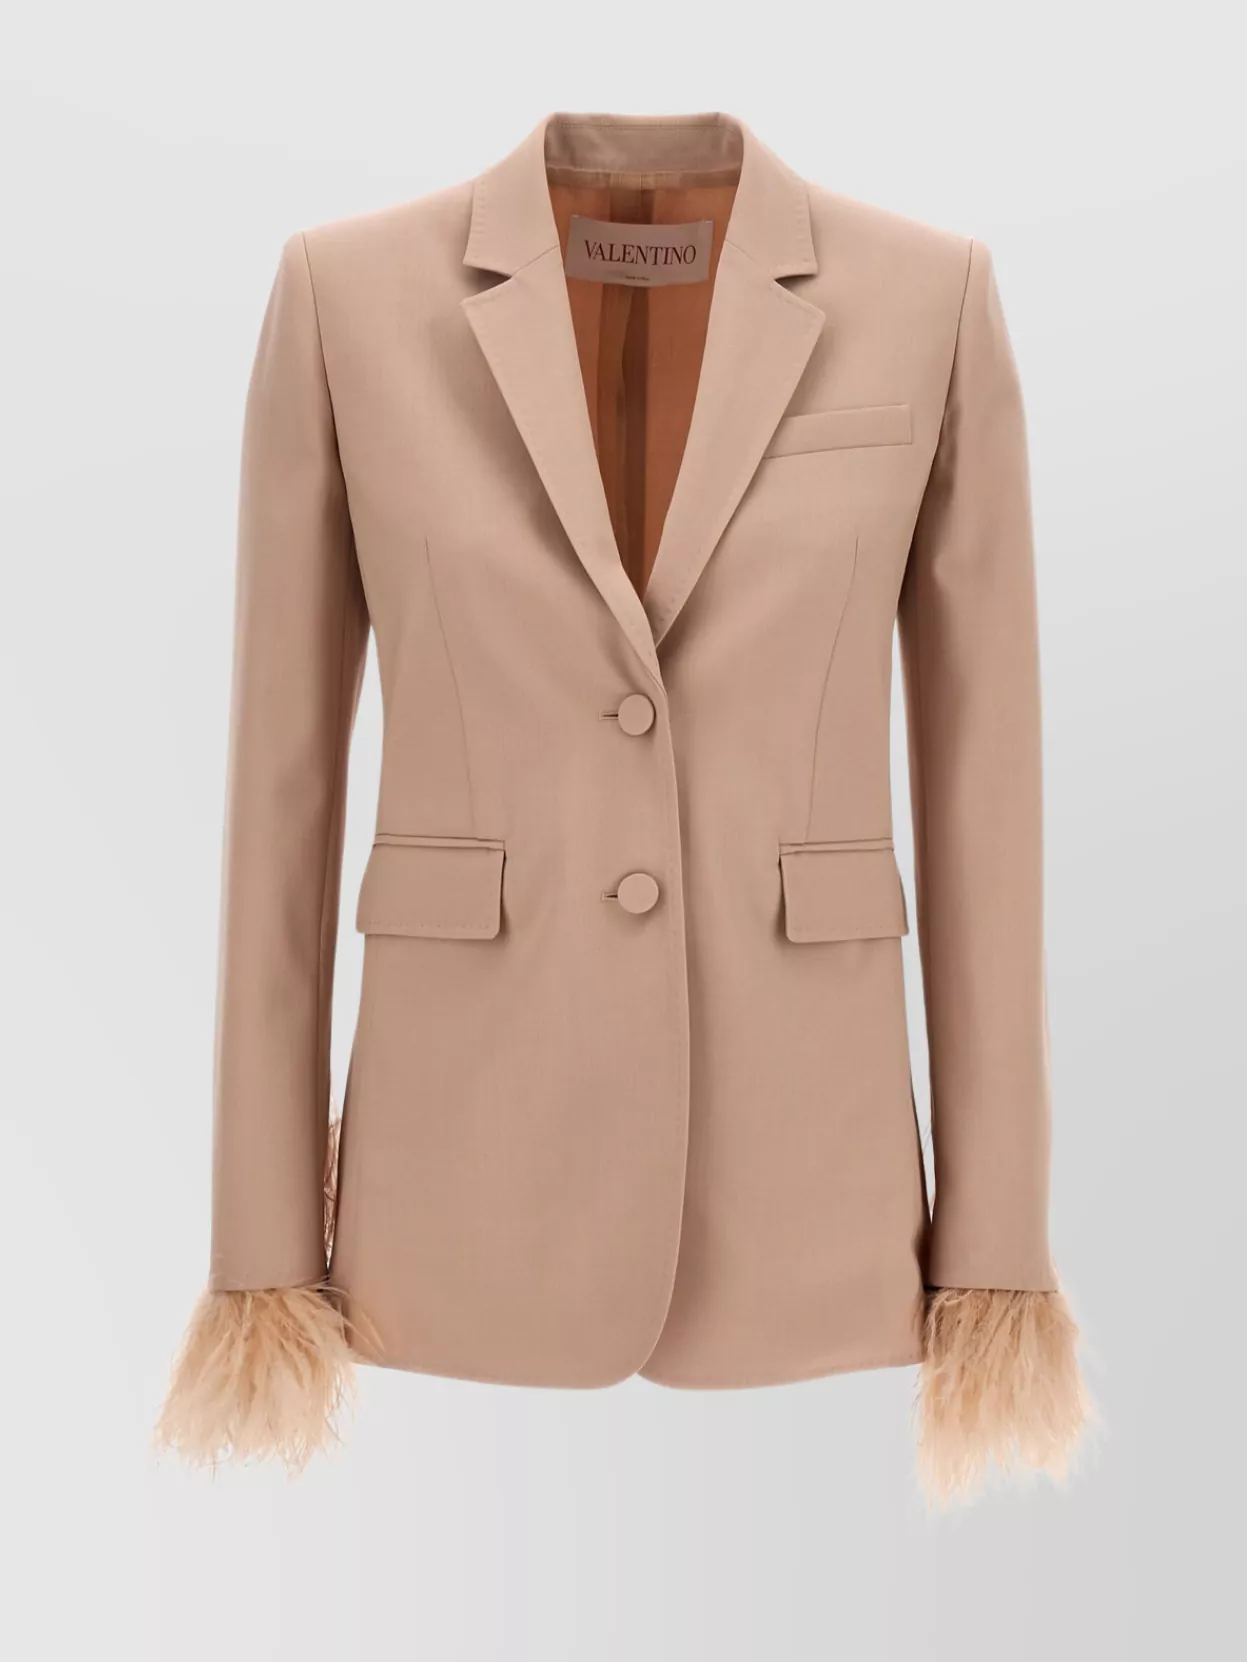 Valentino Wool Tailored Blazer Dry Tailoring In Brown